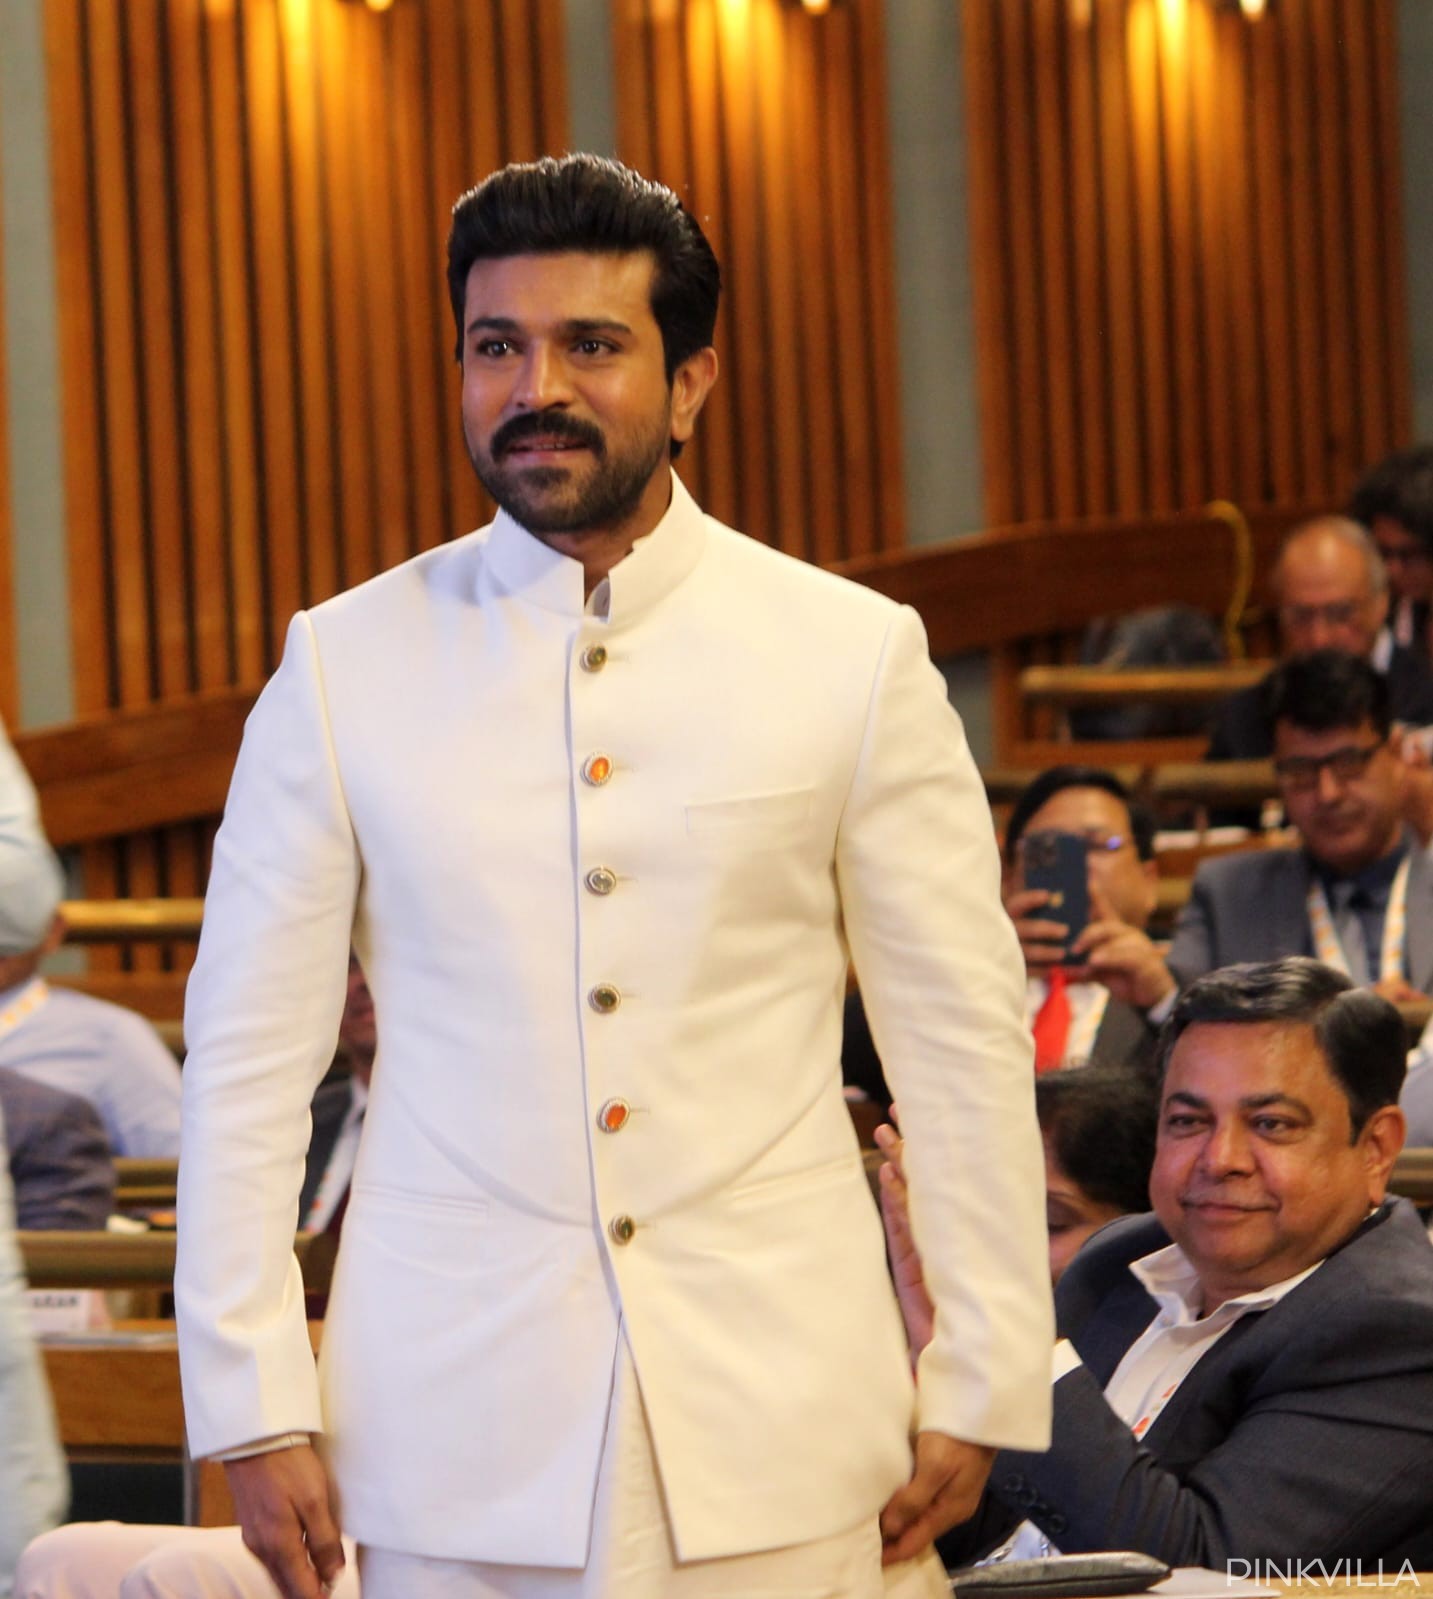 Ram Charan looks dapper in an off-white ethnic outfit.